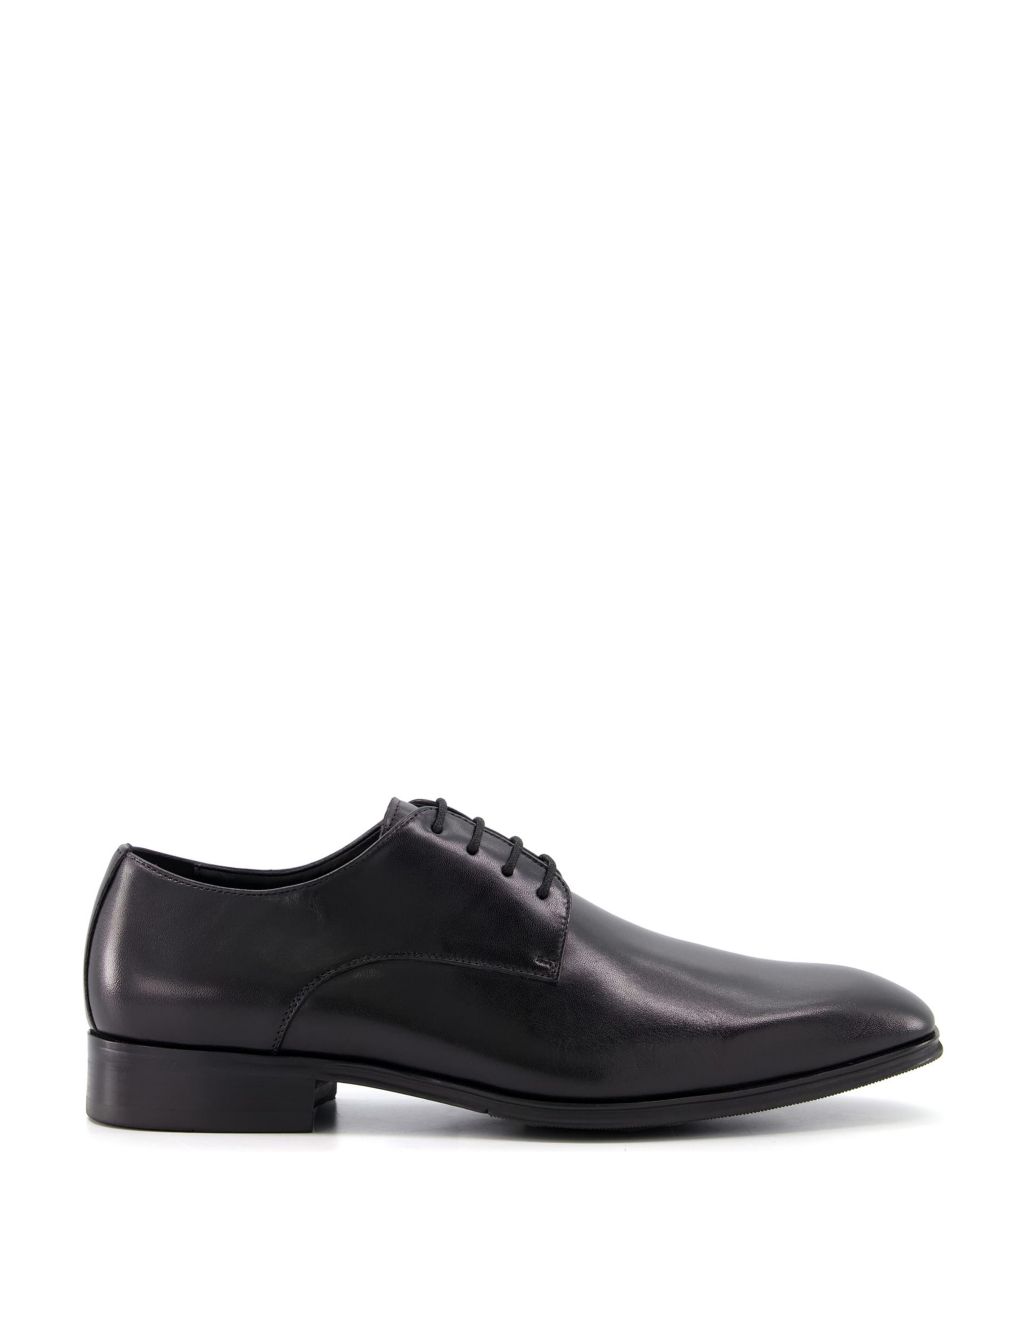 Buy Leather Oxford Shoes | Dune London | M&S